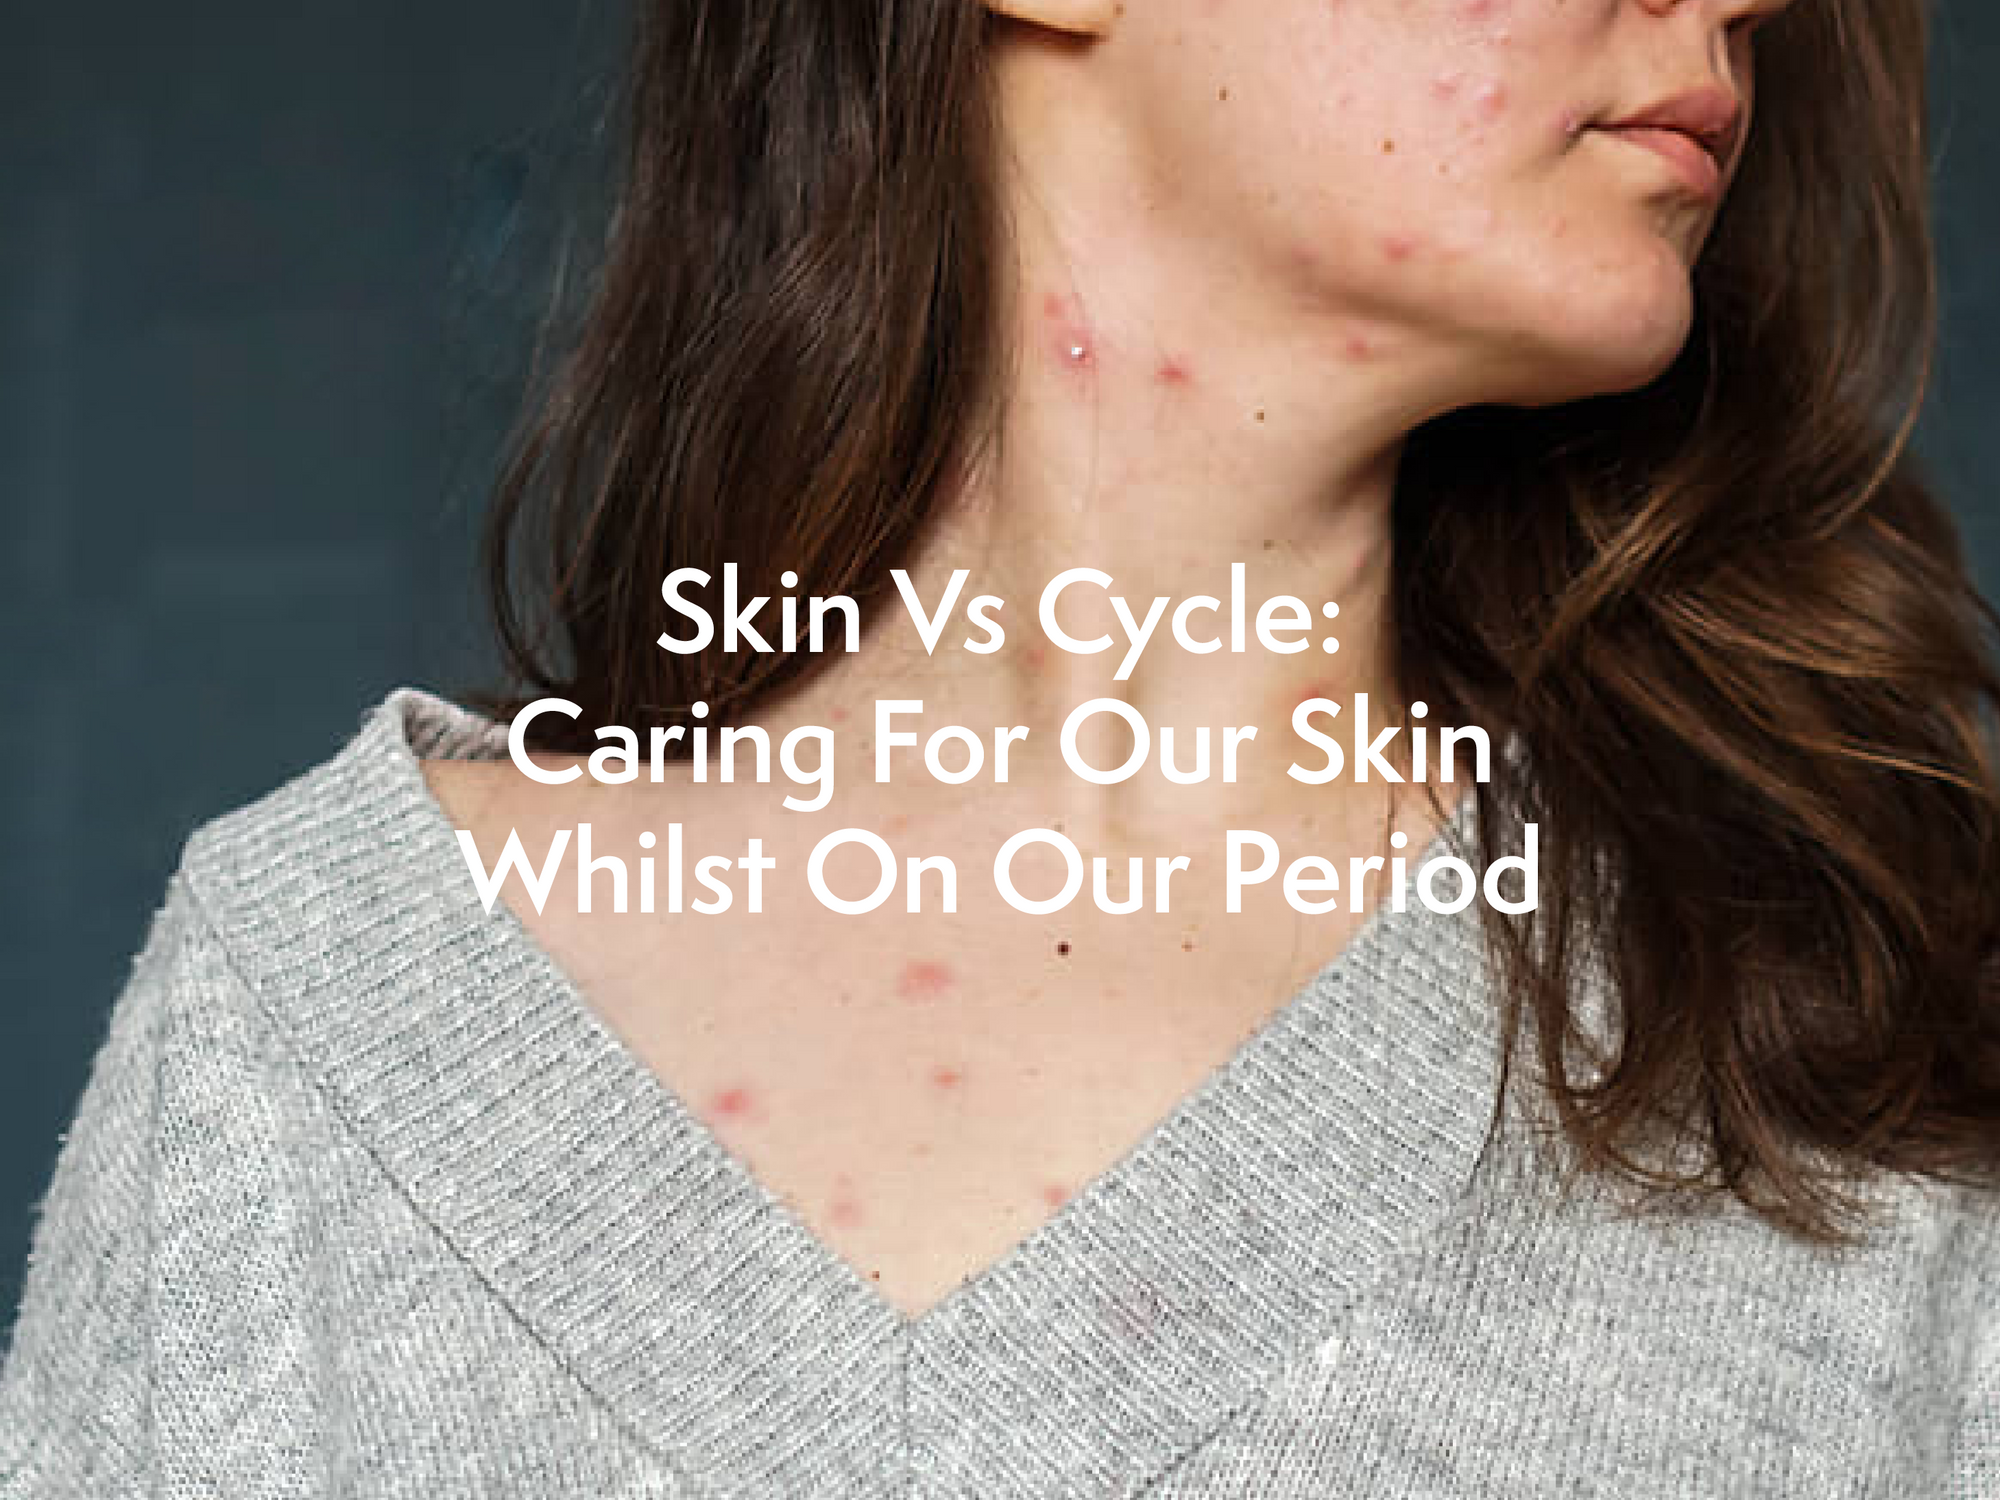 Skin Vs Cycle: How We Should Be Caring For Our Skin Whilst On Our Period